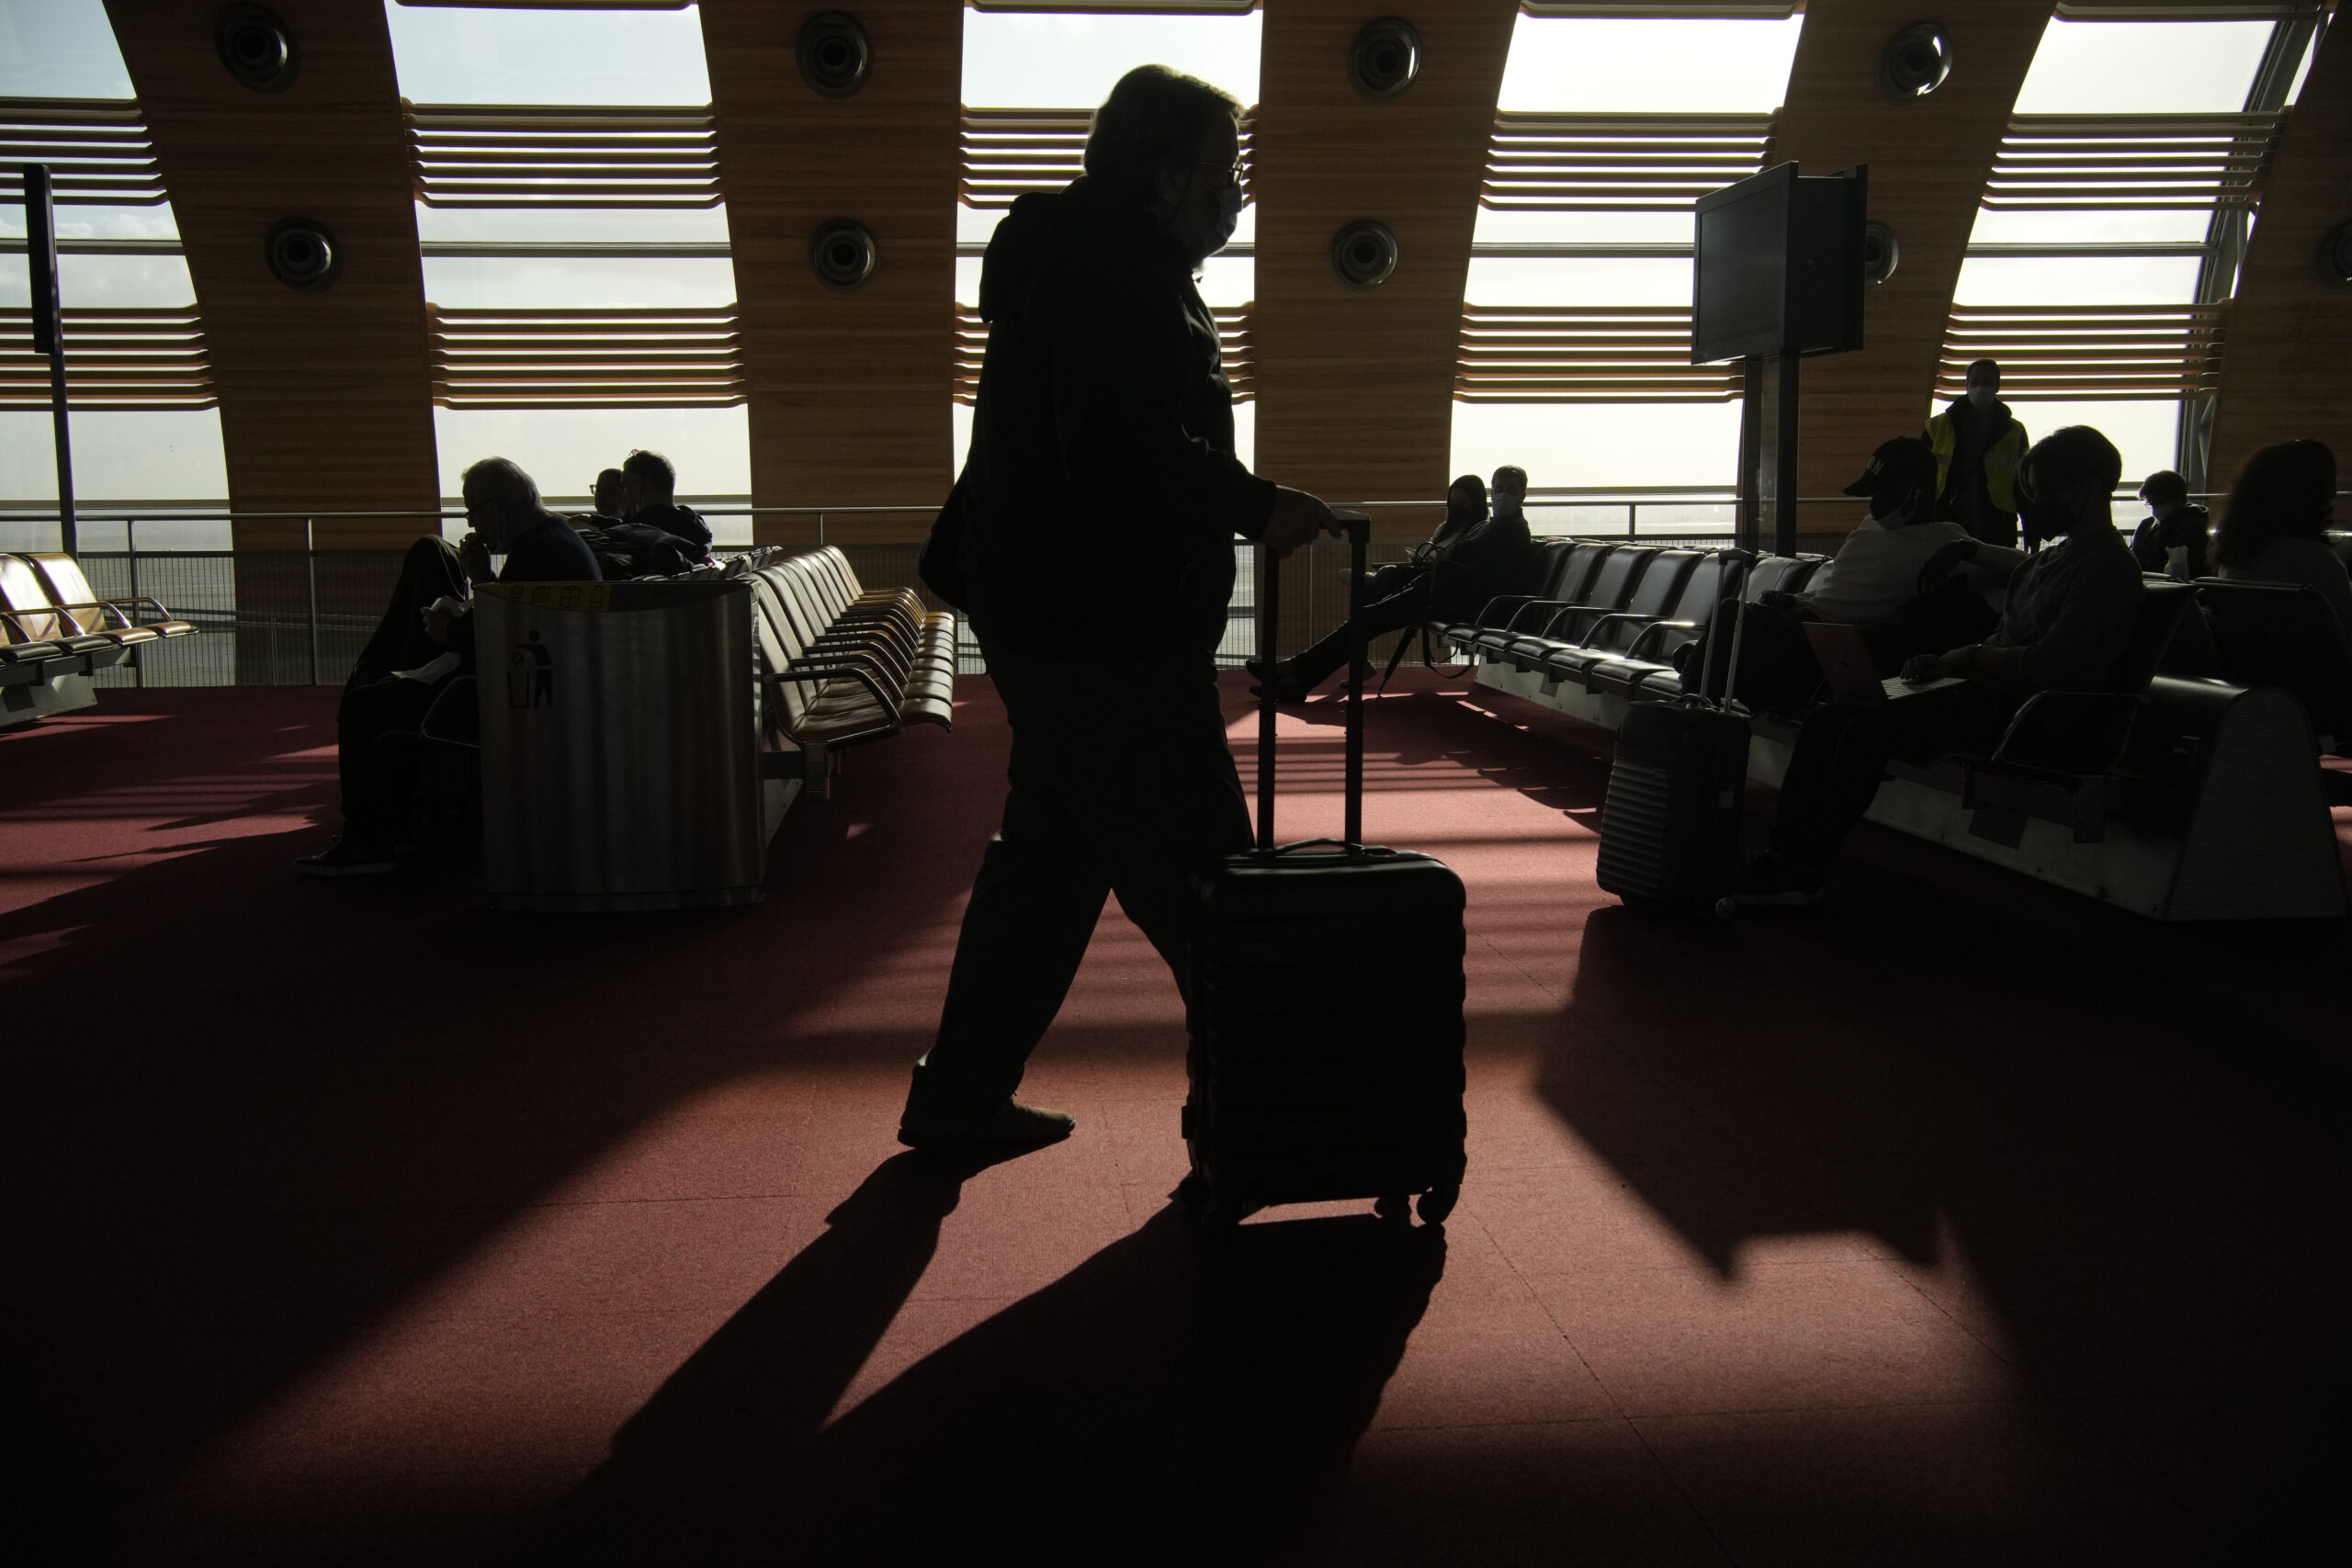 A passenger for United States wheels his luggage in the waiting zone before boarding a flight in the Charles de Gaulle airport, north of Paris, Monday, Nov.8, 2021. The U.S. lifted restrictions Monday on travel from a long list of countries including Mexico, Canada and most of Europe, allowing tourists to make long-delayed trips and family members to reconnect with loved ones after more than a year and a half apart because of the pandemic. (AP Photo/Christophe Ena)